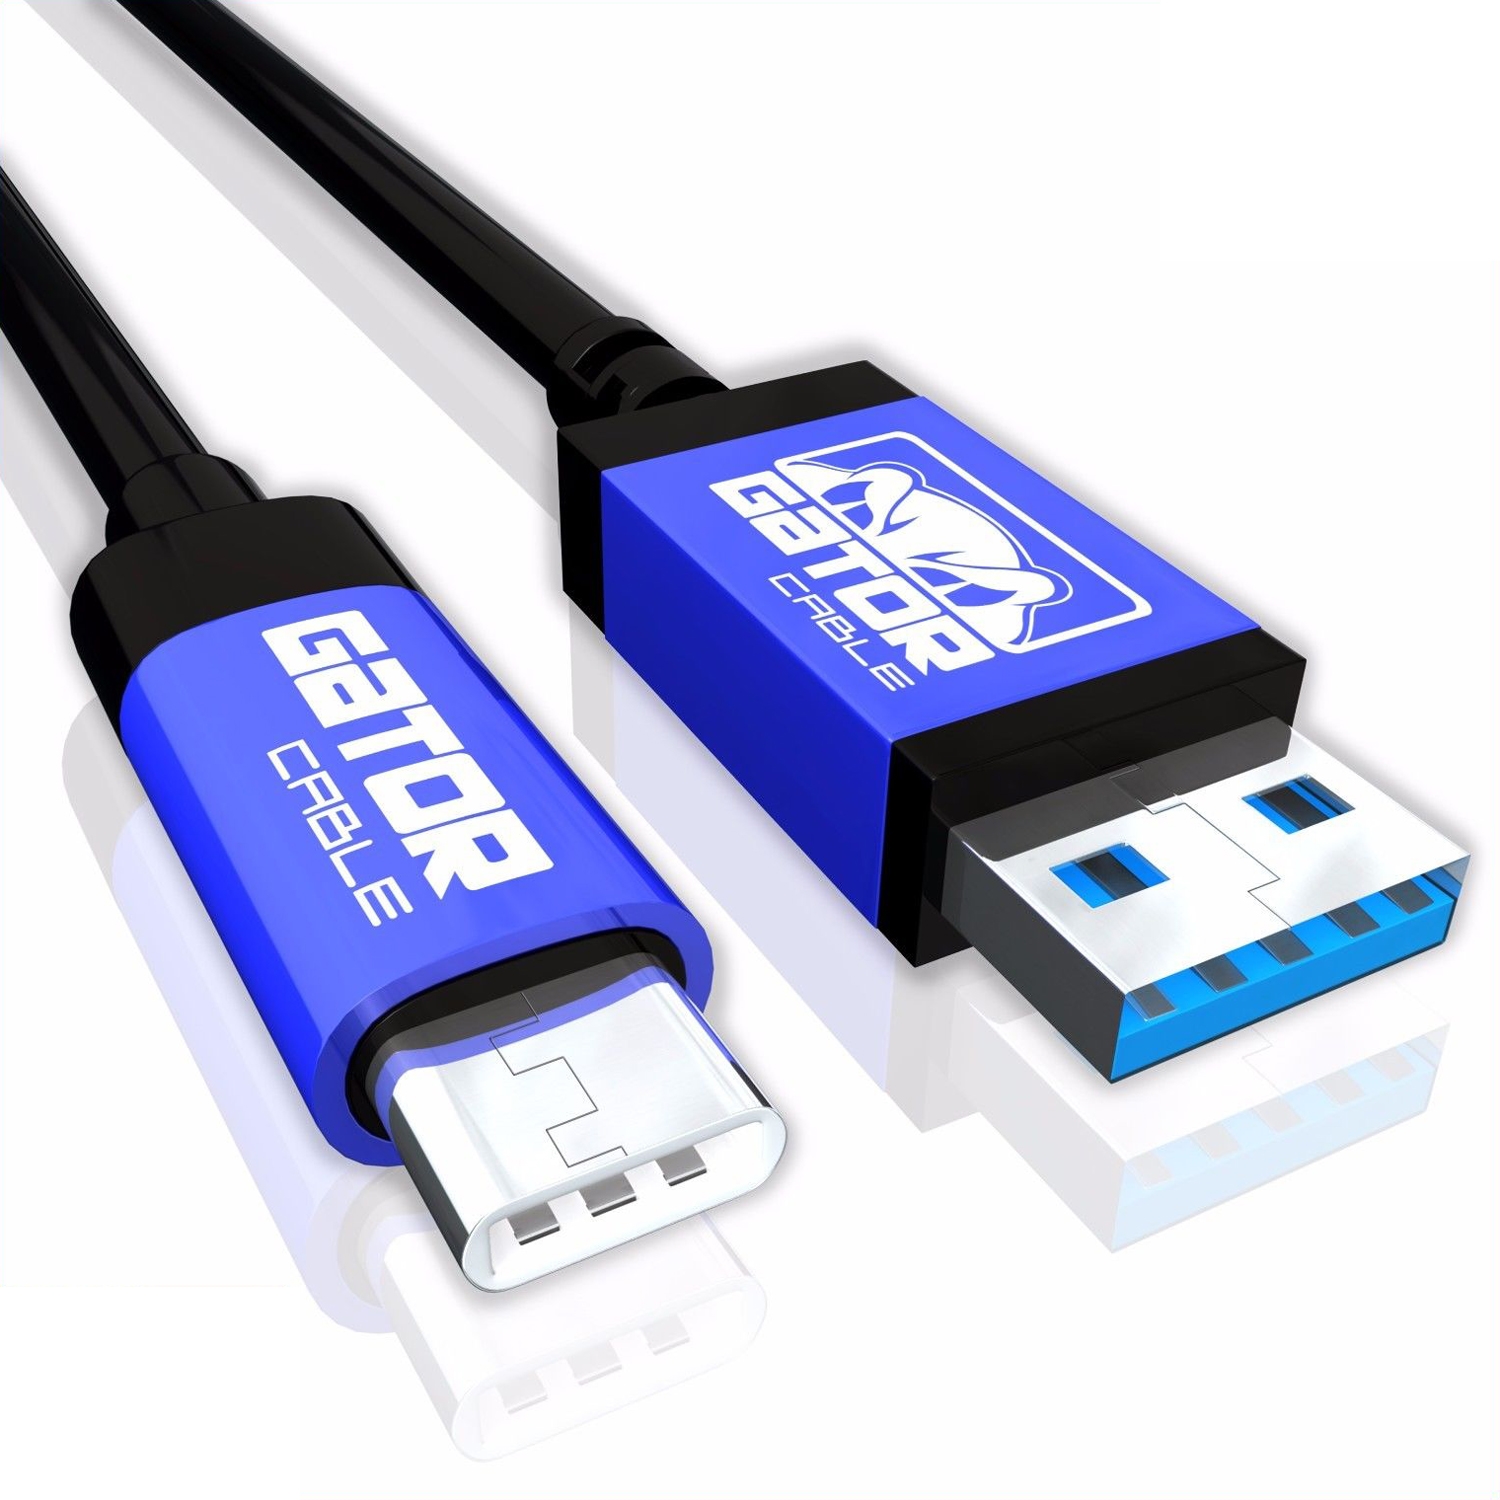 Gator Cable Type C USB Cable Blue - 6 feet